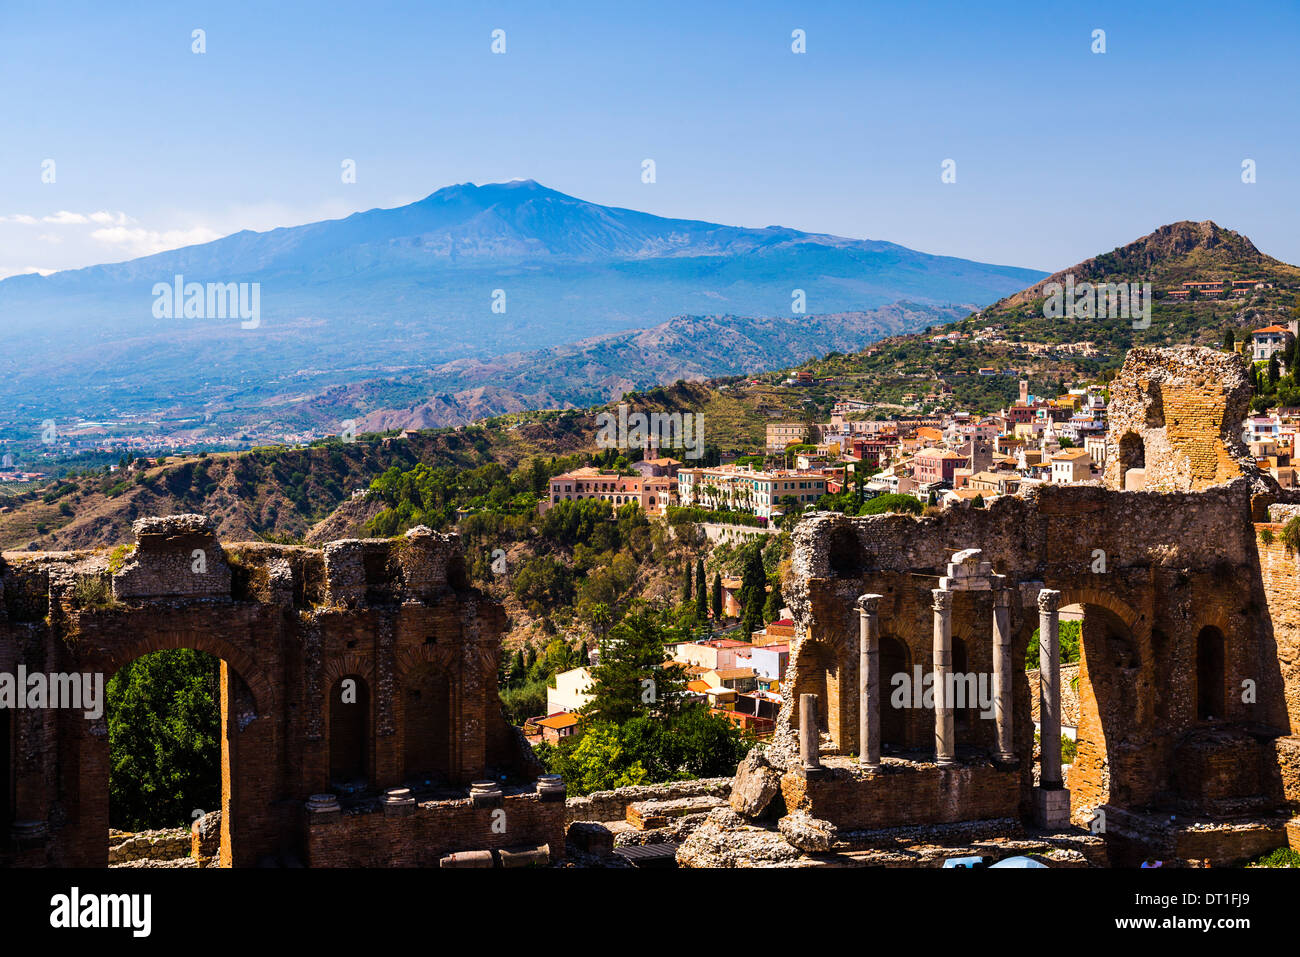 Mount Etna Volcano with ruins of Teatro Greco (Greek Theatre) in the foreground, Taormina, Sicily, Italy, Europe Stock Photo